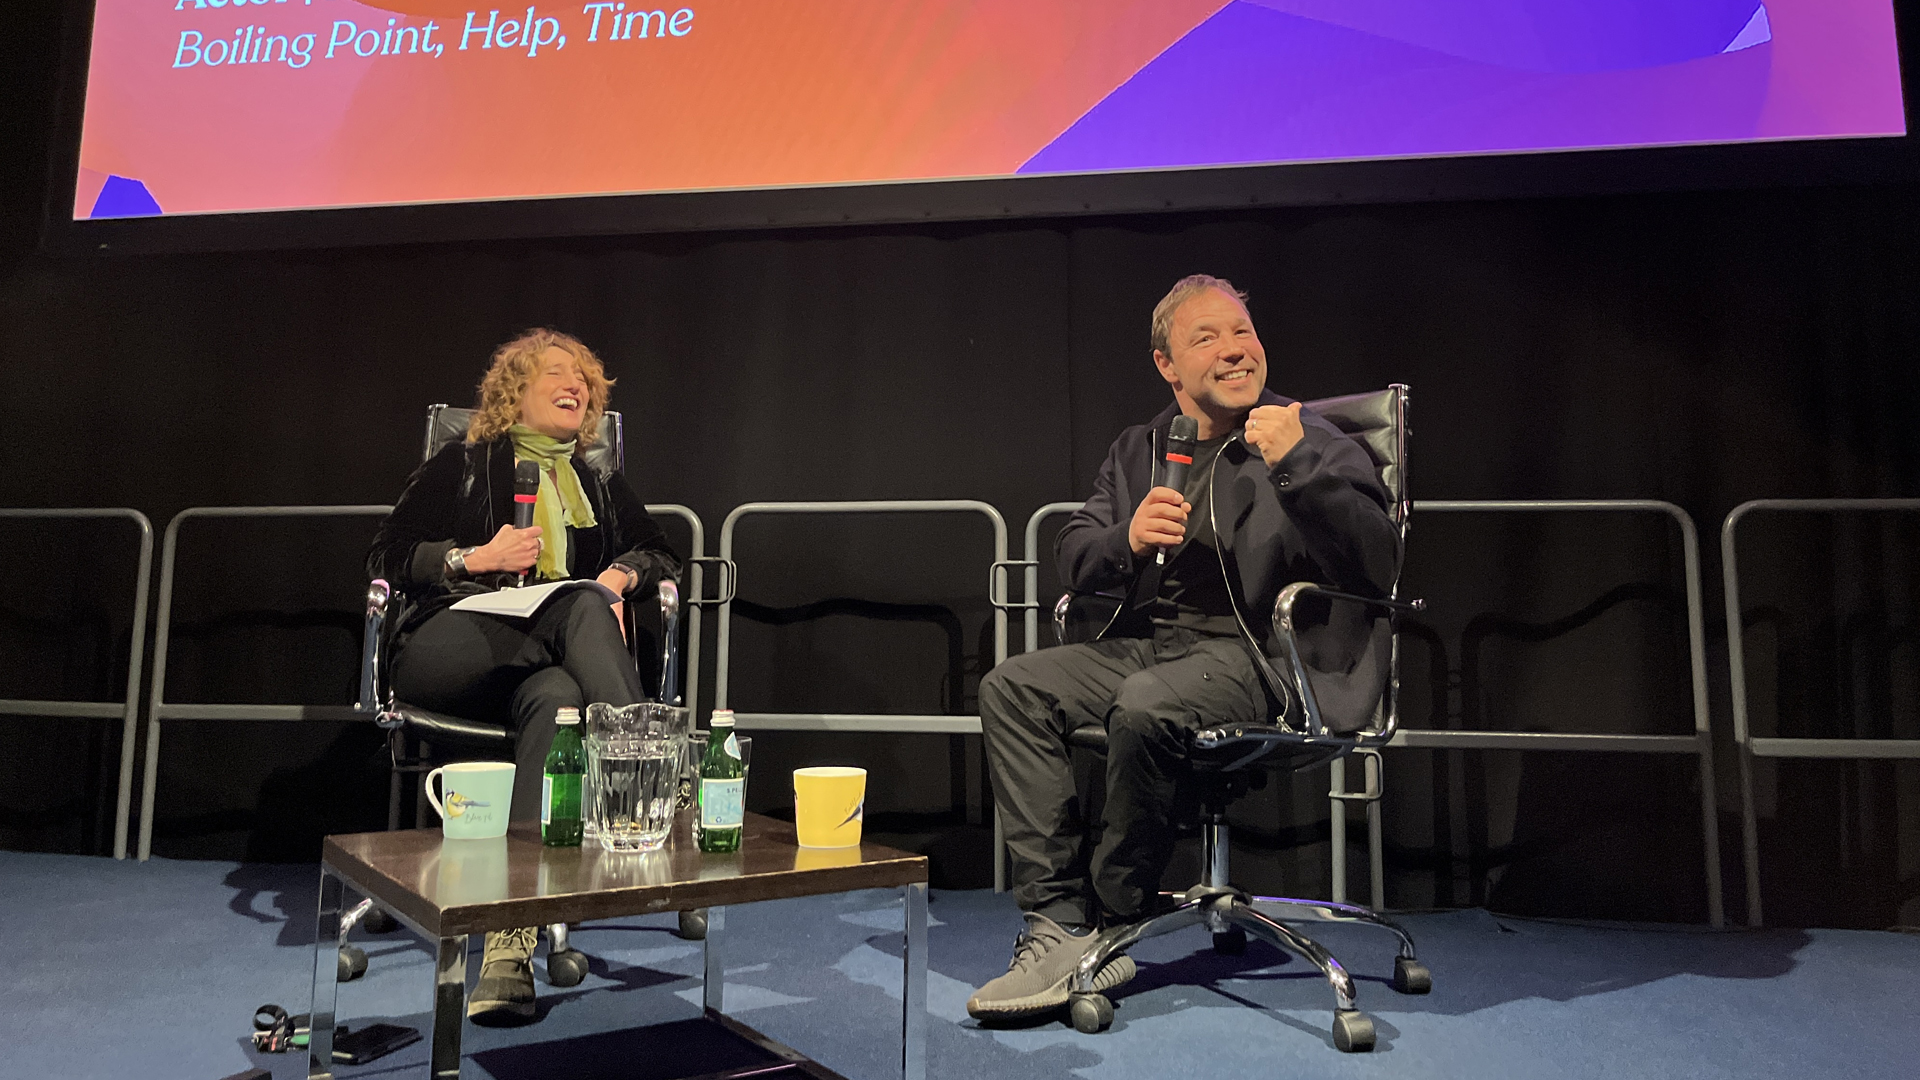 Stephen Graham and host talking in NFTS masterclass